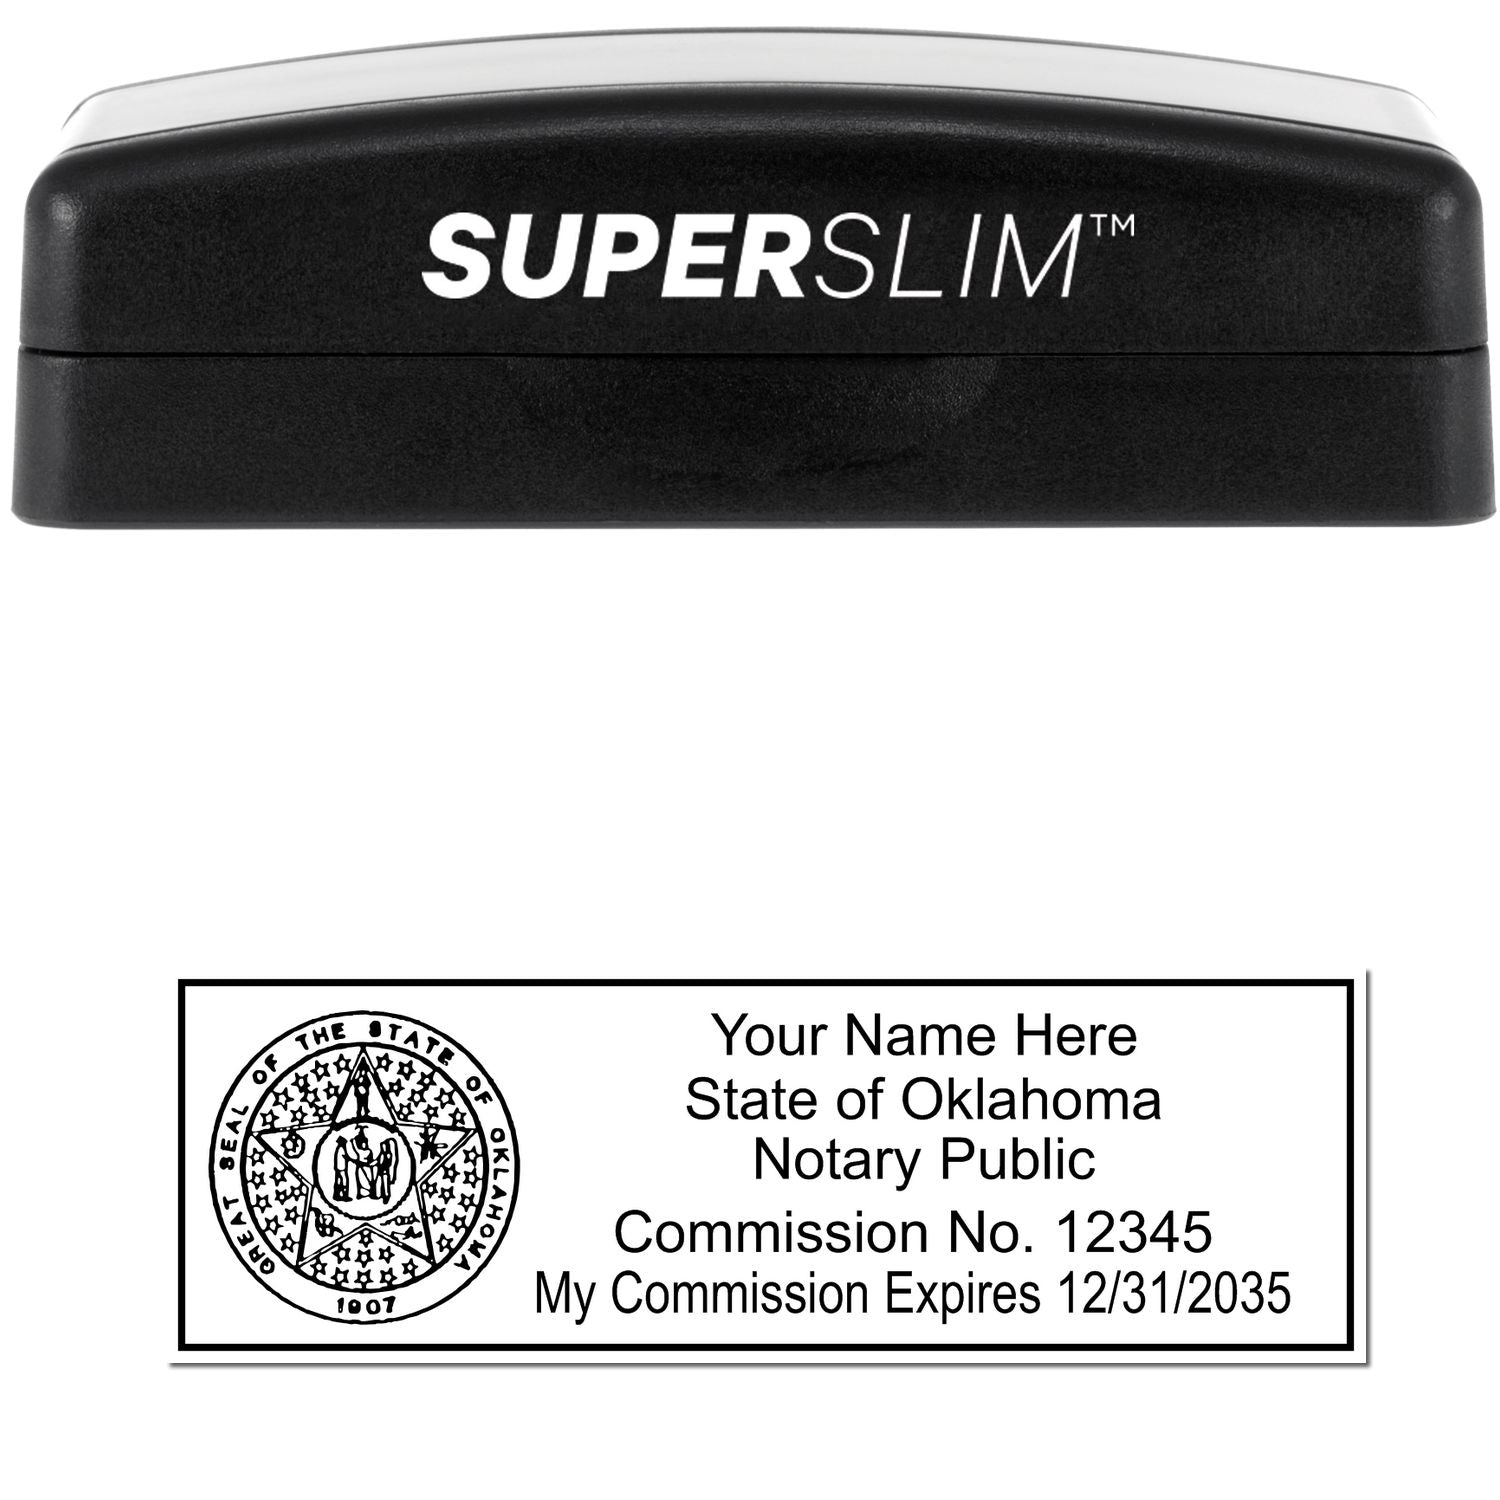 The main image for the Super Slim Oklahoma Notary Public Stamp depicting a sample of the imprint and electronic files